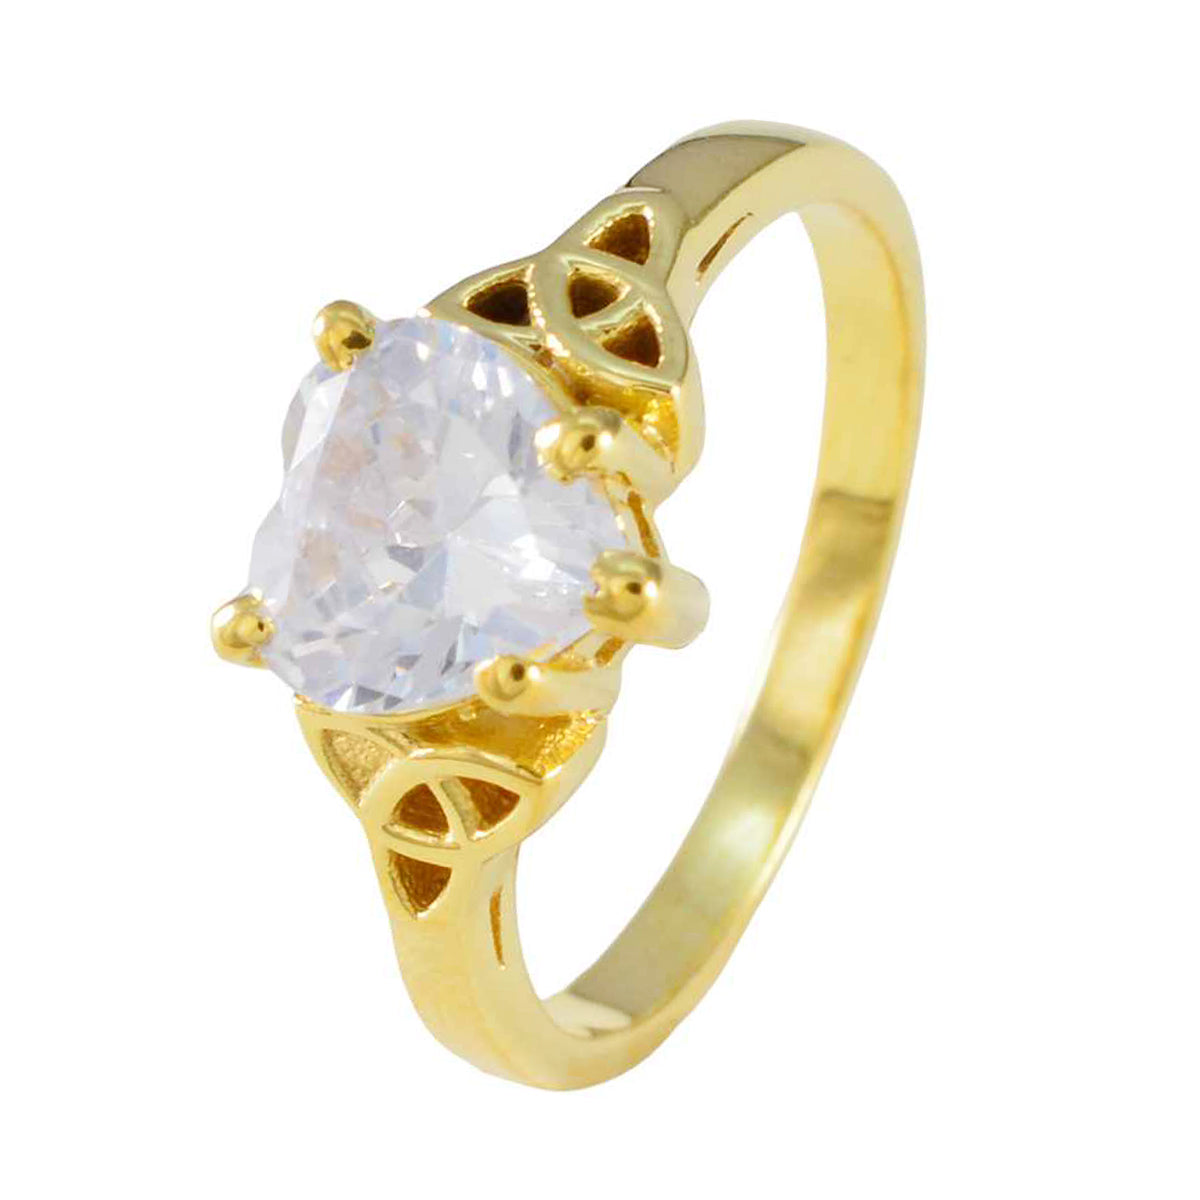 Riyo Excellent Silver Ring With Yellow Gold Plating White CZ Stone Heart Shape Anniversary Ring